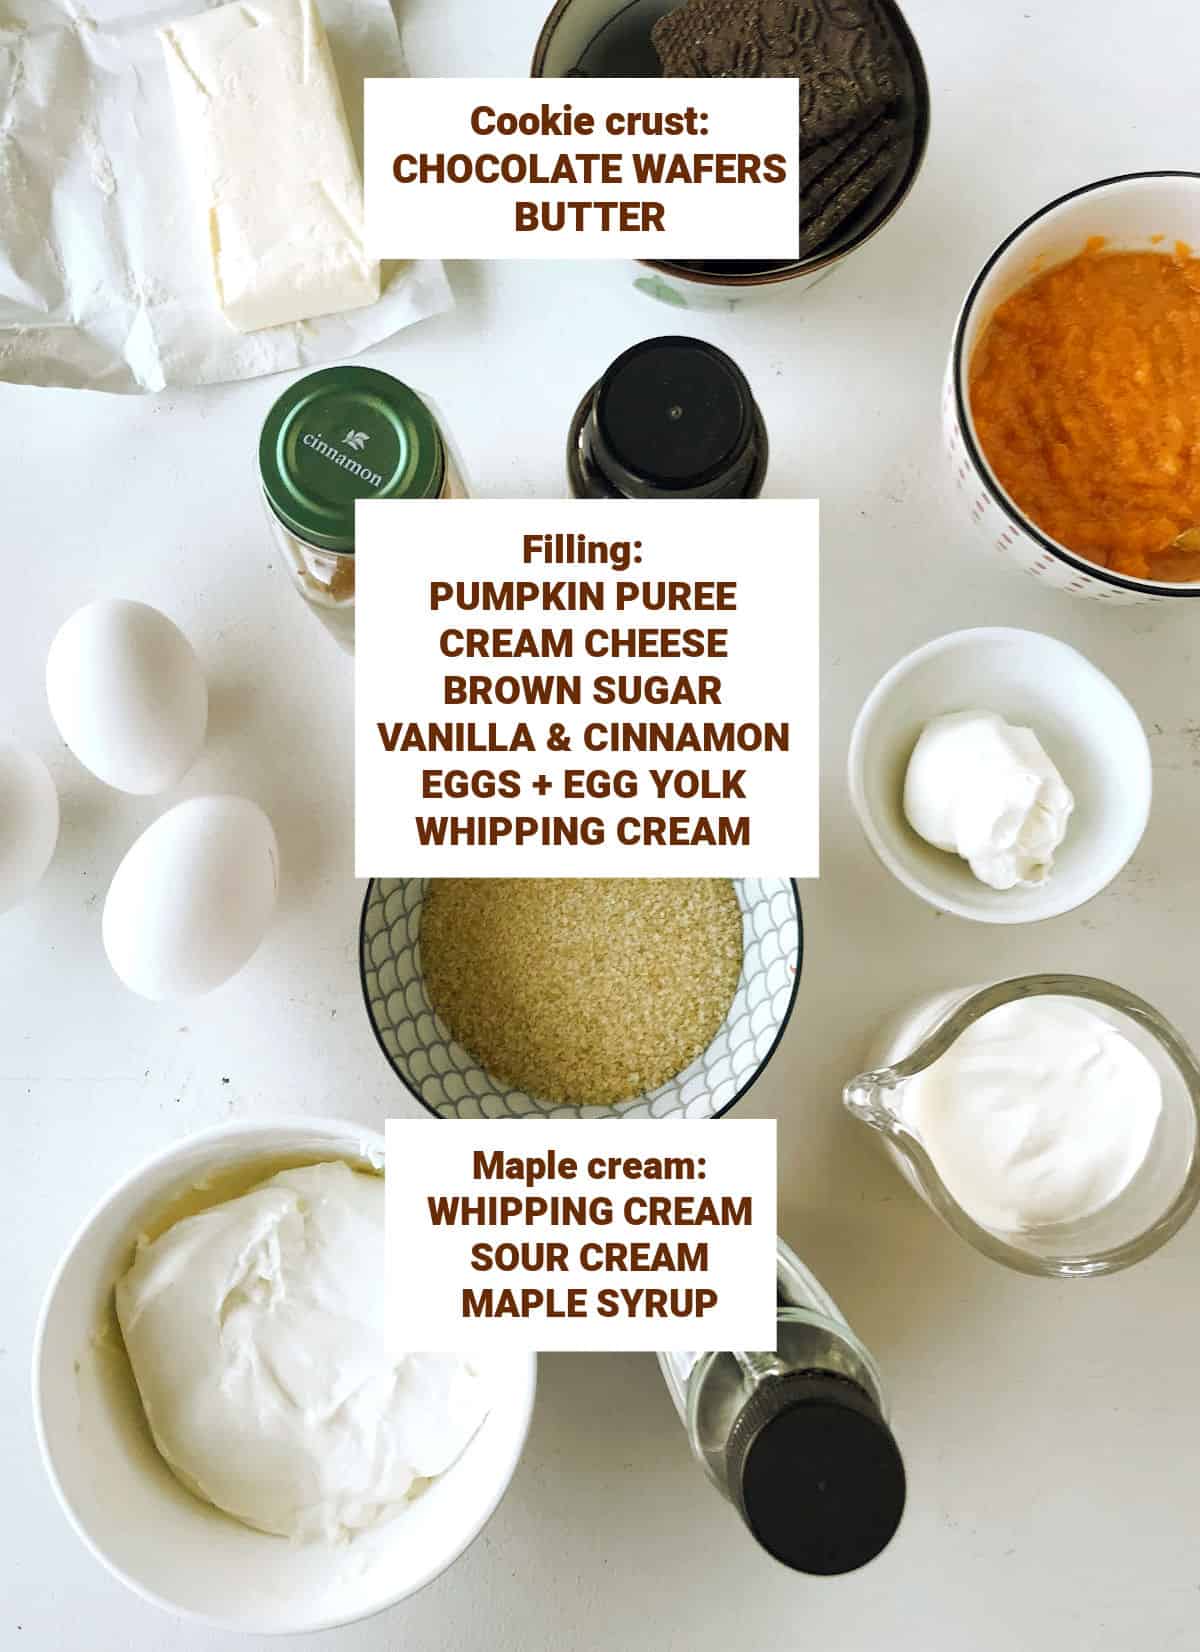 Ingredients for pumpkin maple cream cheesecake in bowls on a white surface including sugar, eggs, cinnamon, vanilla, chocolate crumbs, butter.